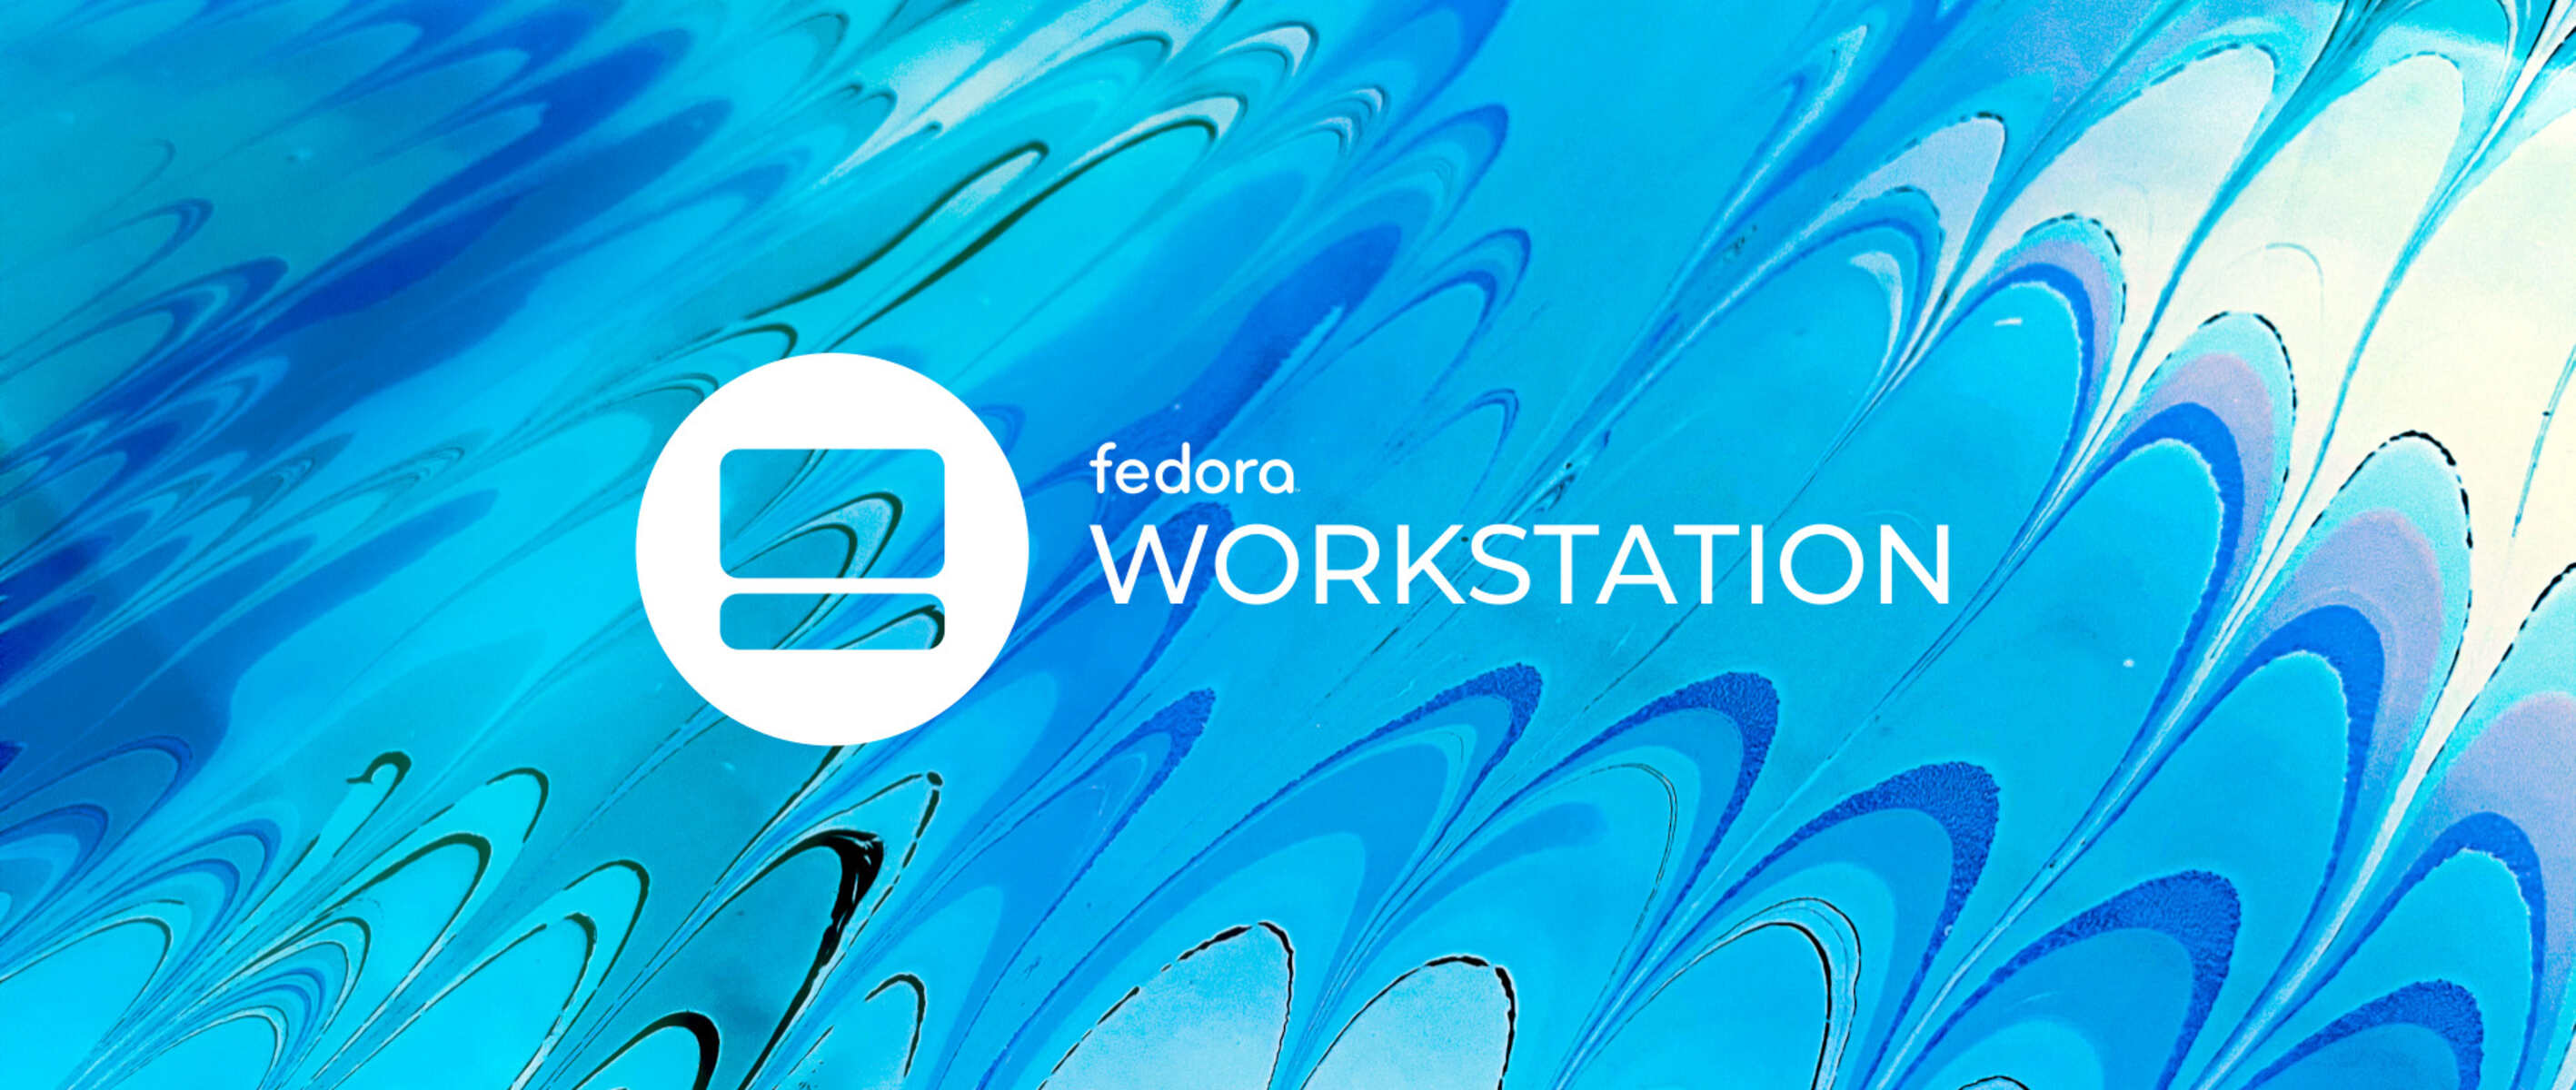 How Many Remote Users Does Fedora Workstation Support?